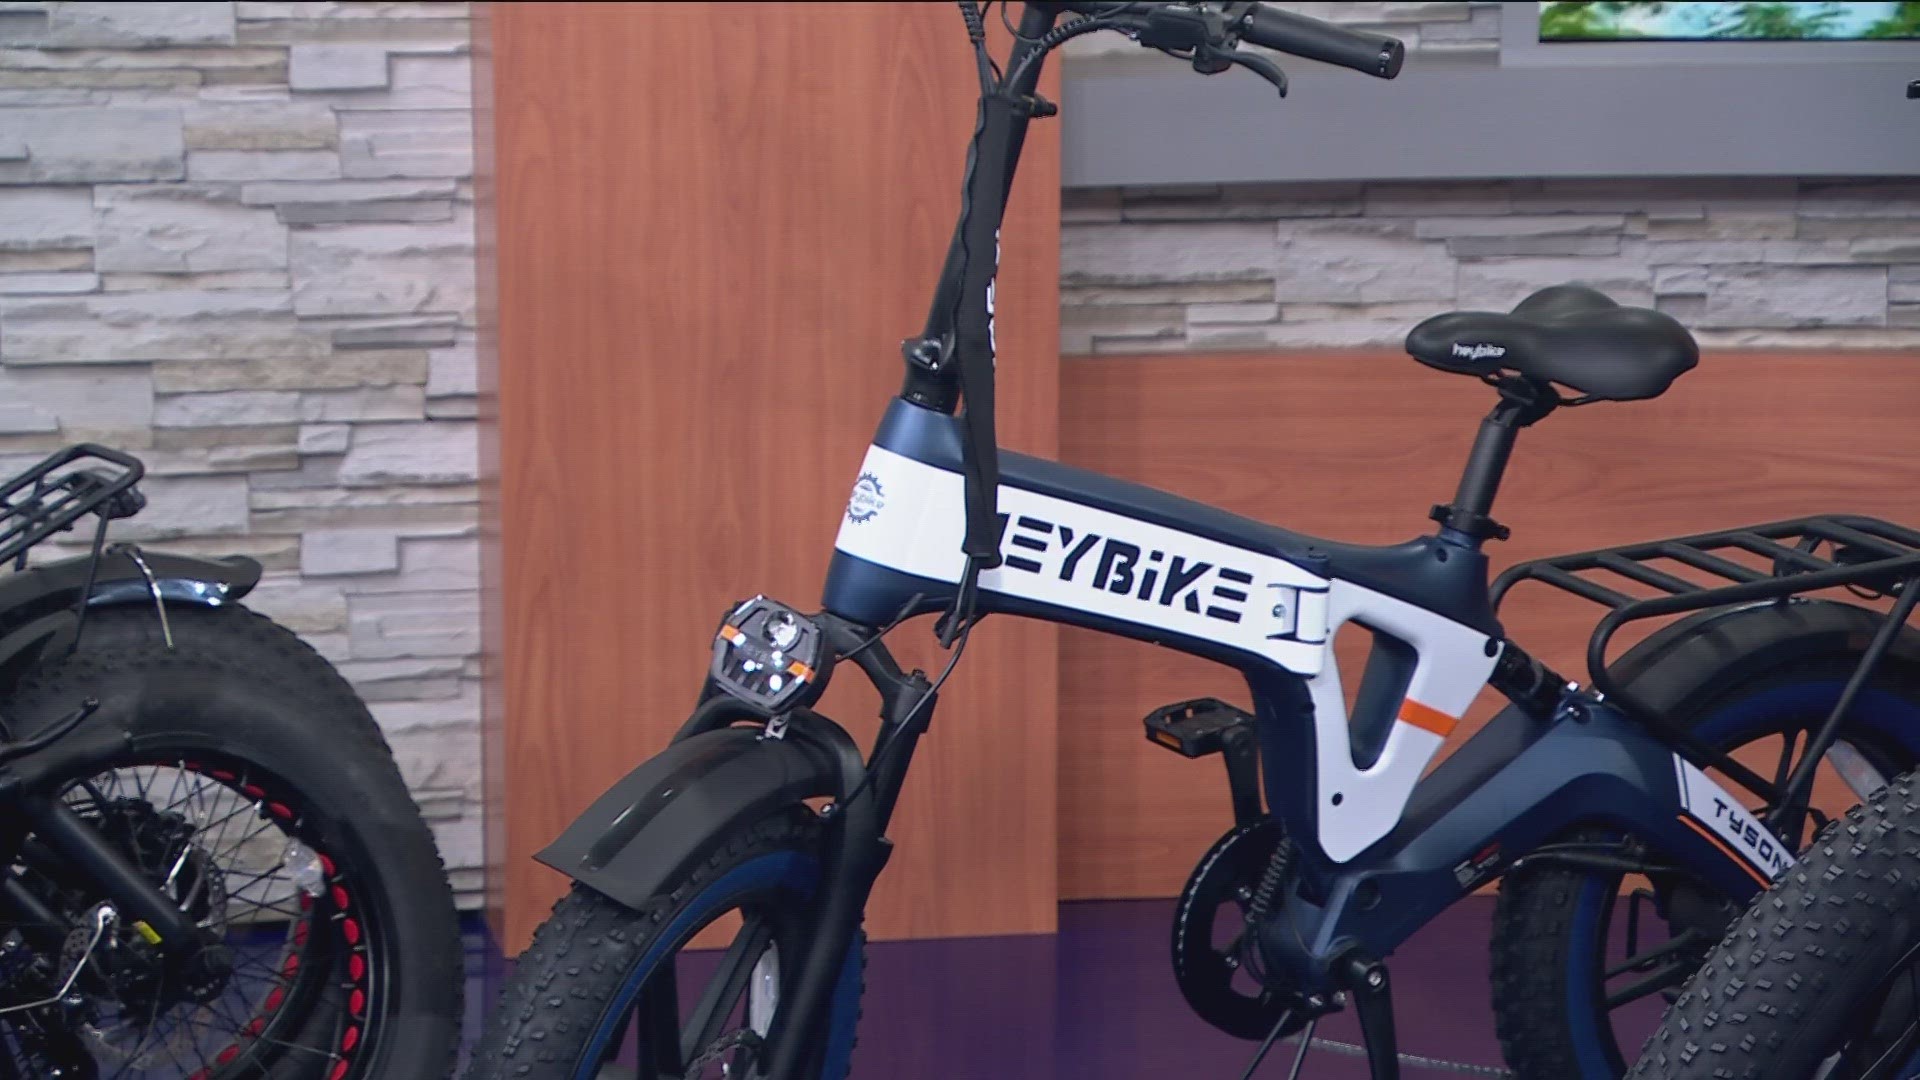 Michael Sweeney from Wolfpoint Group joined KARE 11 Saturday with a few options for electric bicycles.